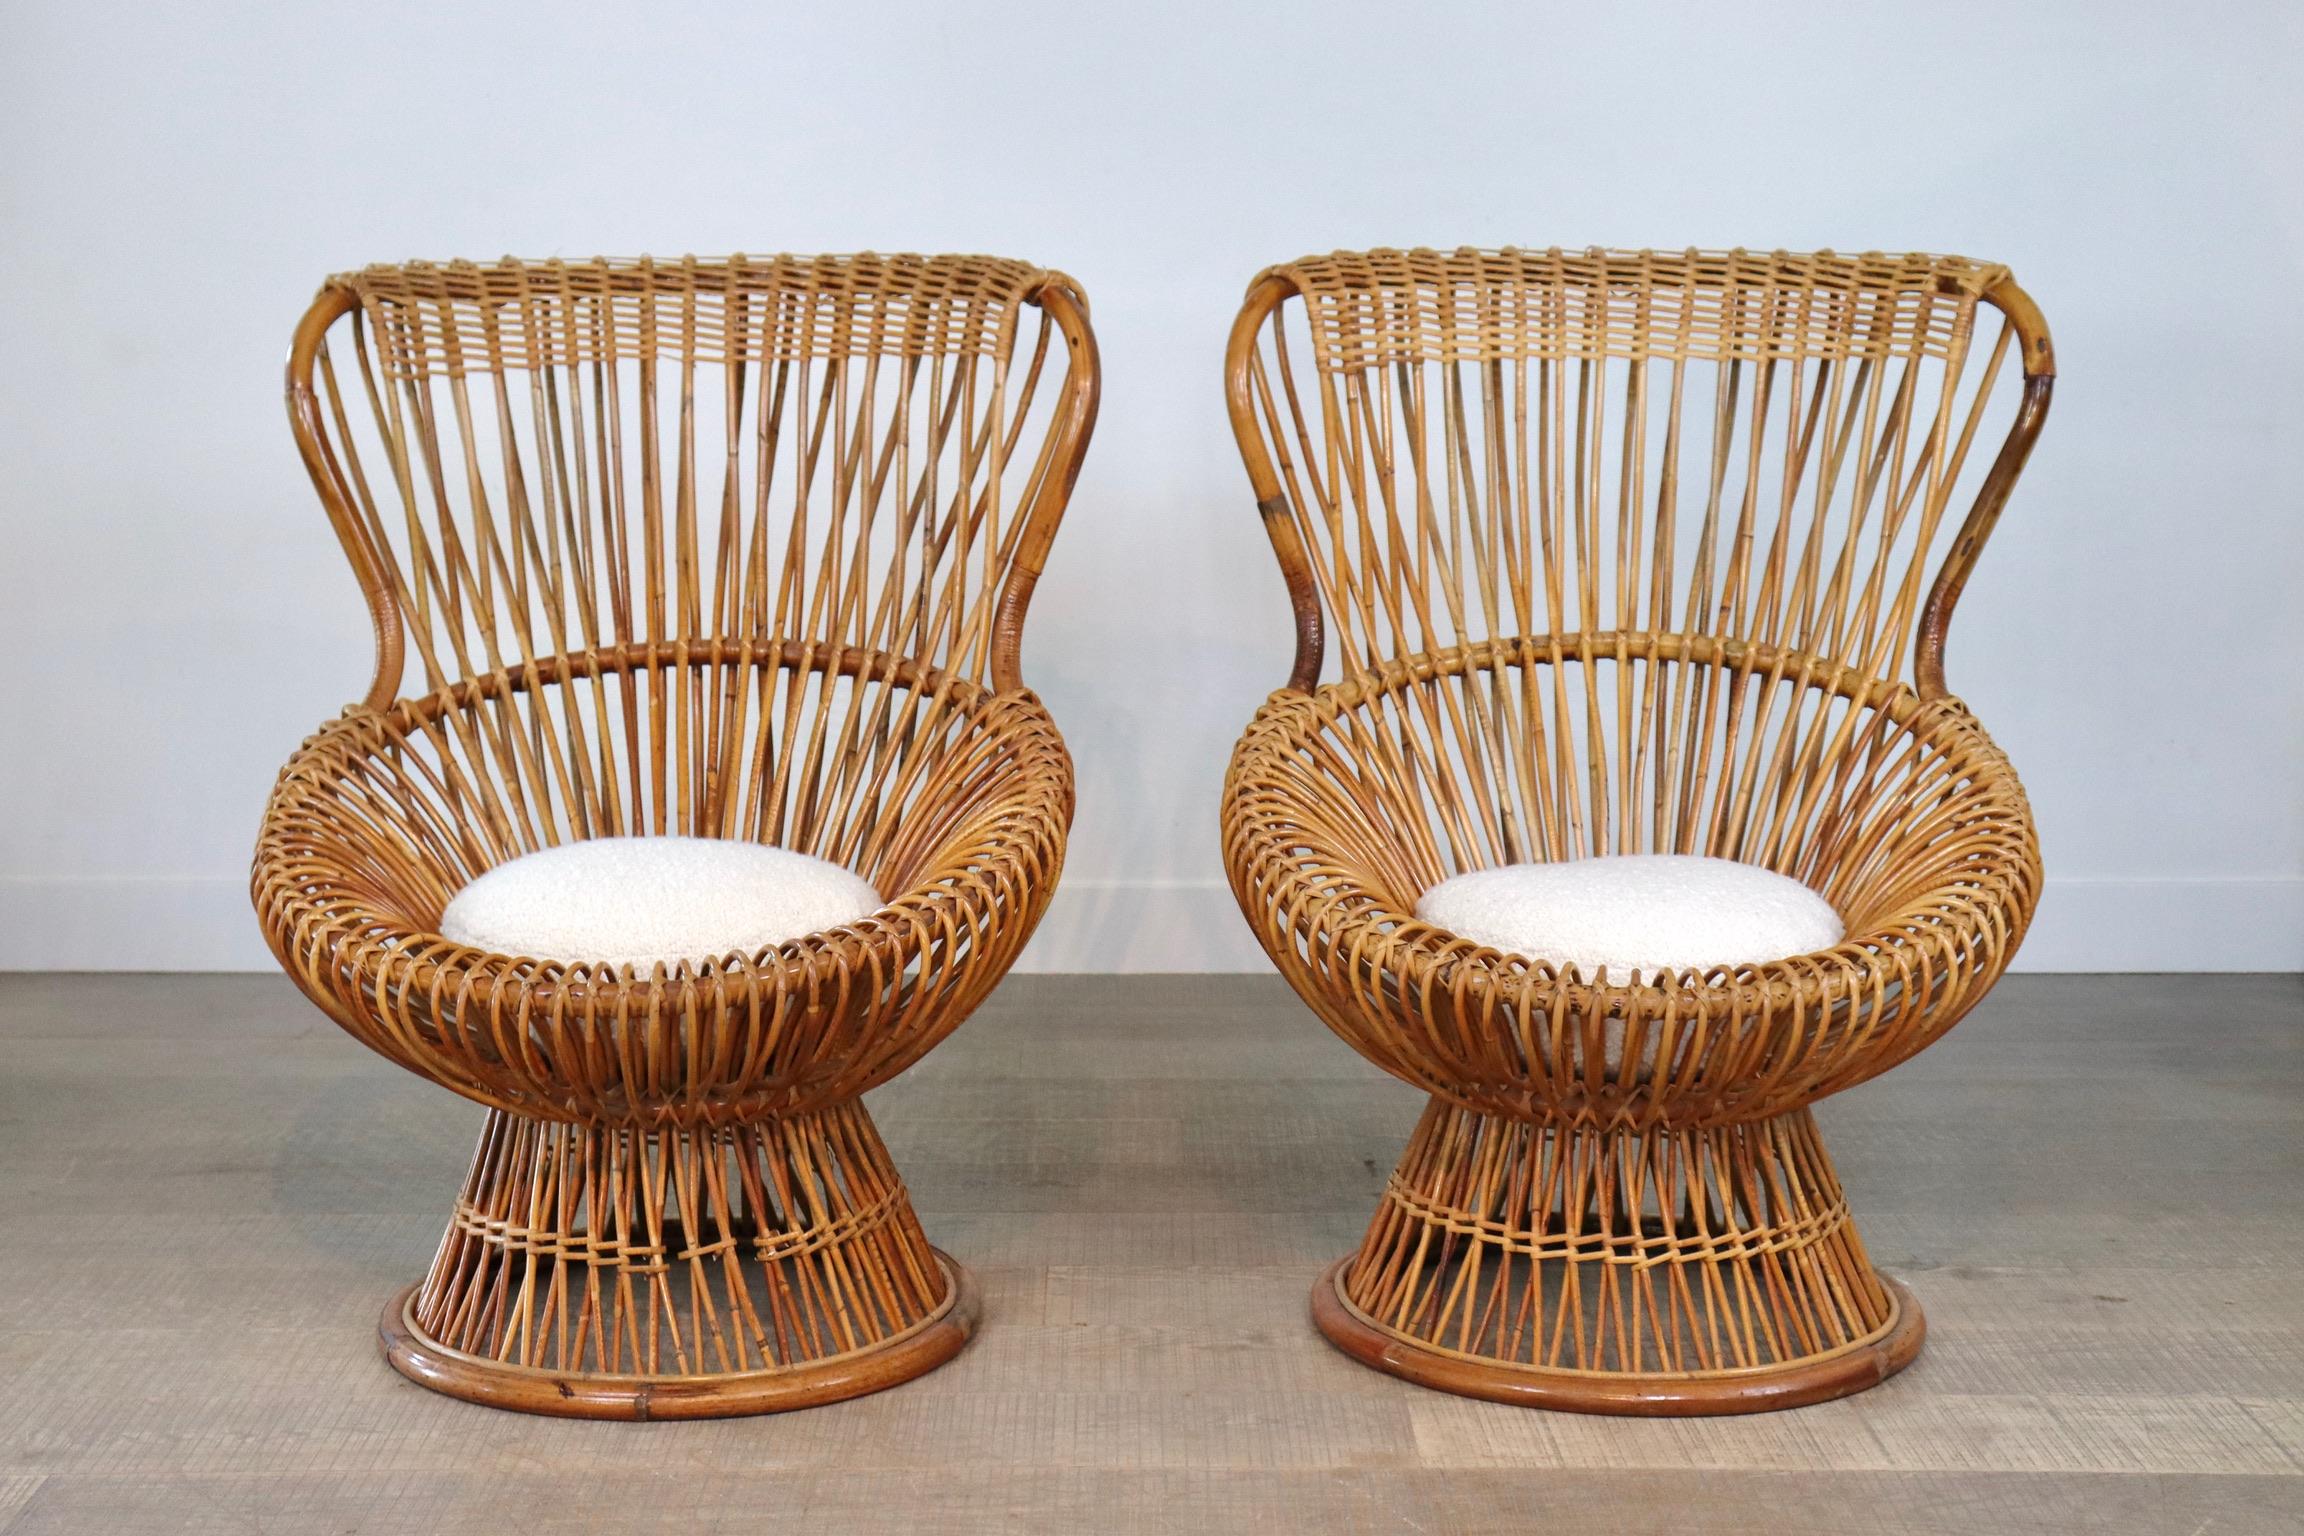 Beautiful rattan chairs by Franco Albini, manufactured by Bonacina. This design won the award of the Milan Triennale in 1951. Beautiful authentic piece and an eyecatcher in any interior. 

Dimensions: H100 x W75 x D80 cm 
Seat height: 40cm